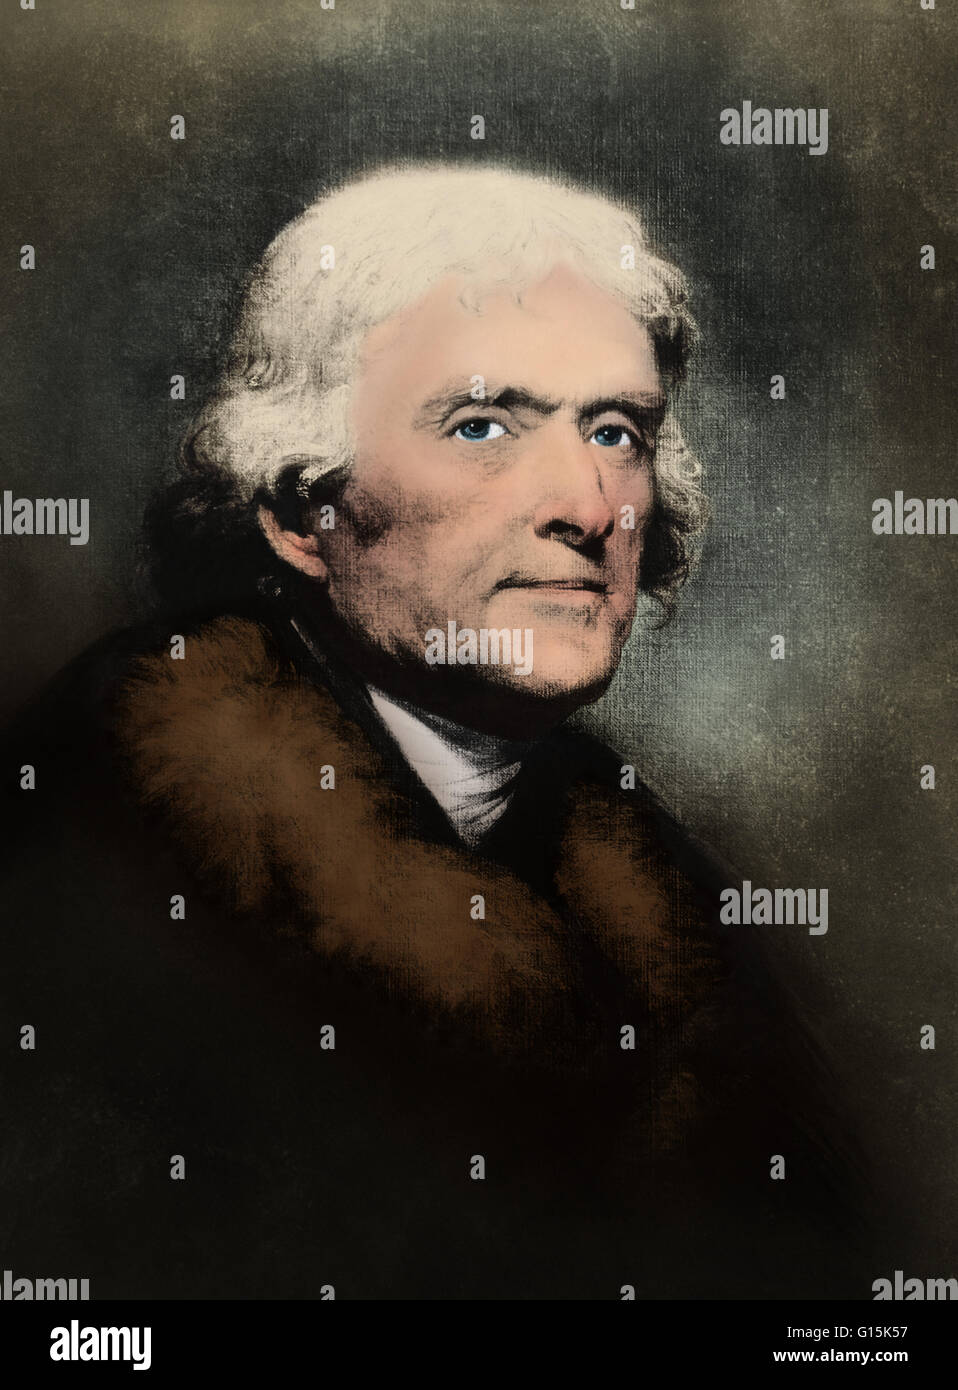 Undated color ehnaced portrait of Thomas Jefferson (April 13, 1743 - July 4, 1826) was an American Founding Father, the principal author of the United States Declaration of Independence (1776) and third President of the United States (1801-1809). At the b Stock Photo